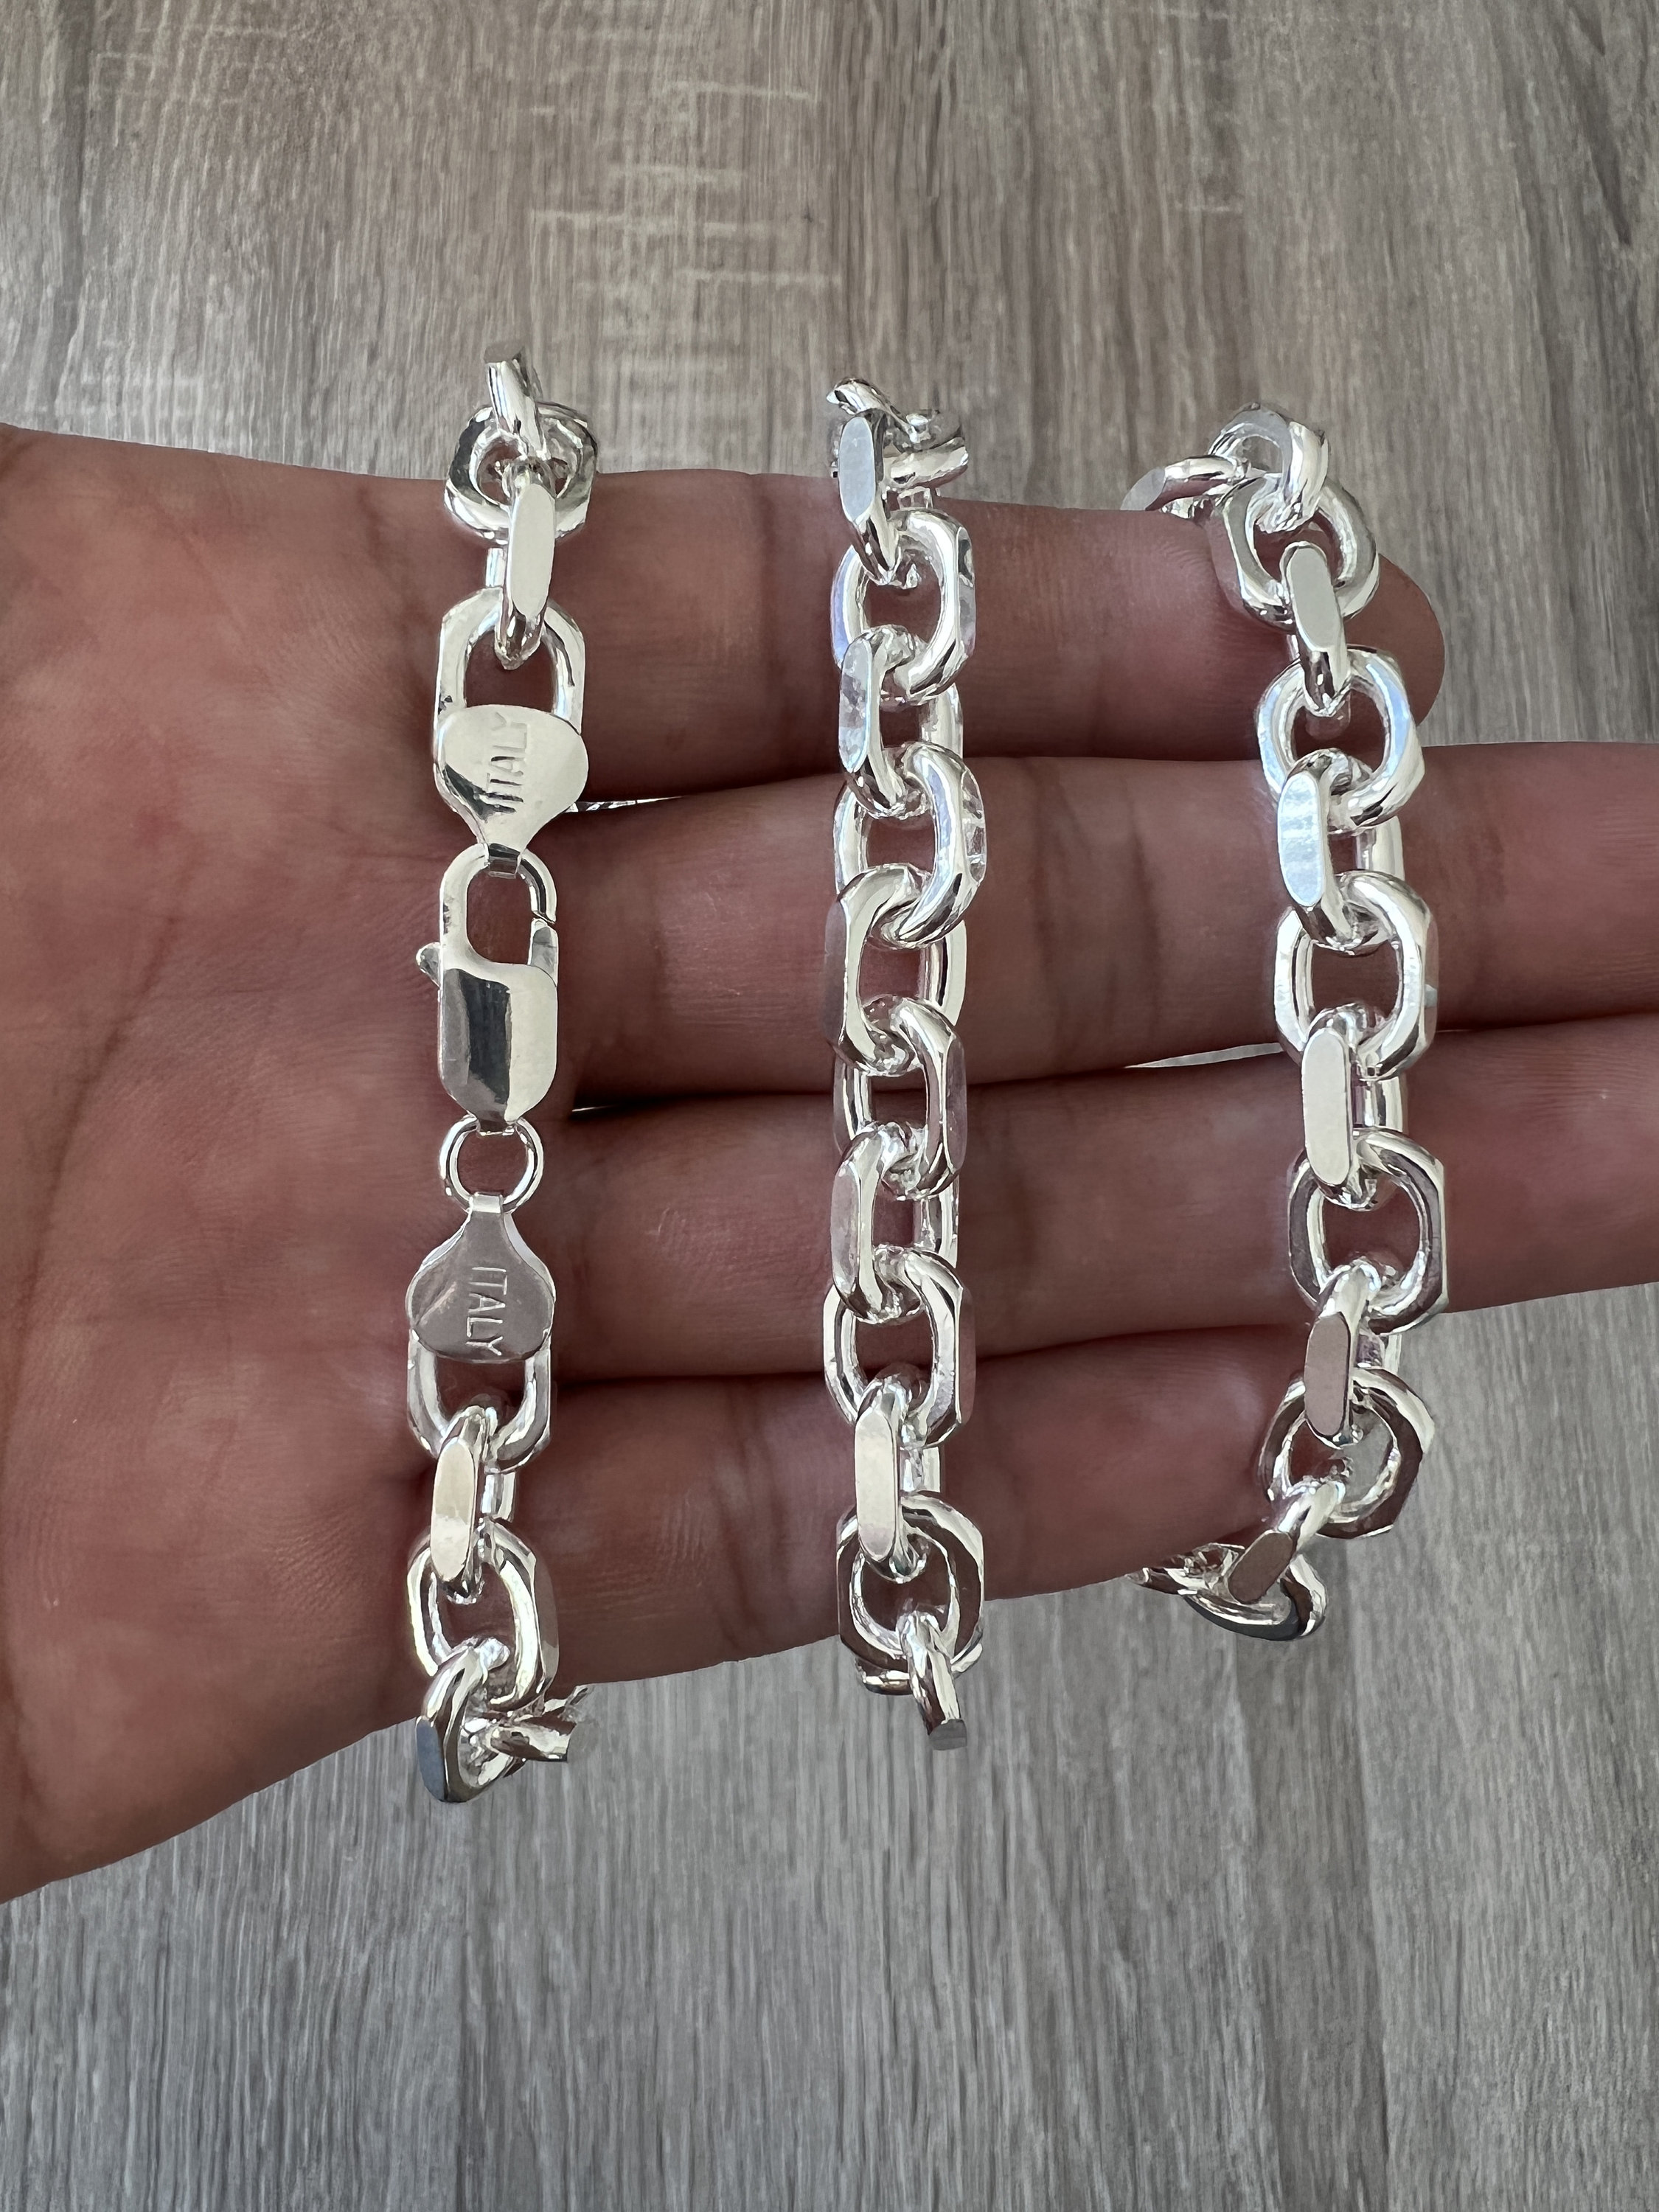 925 Italian Sterling Silver Necklace - Bracelet - Anklet - Long Silver  Chains - 3mm Rolo Necklace Chain -All Sizes.